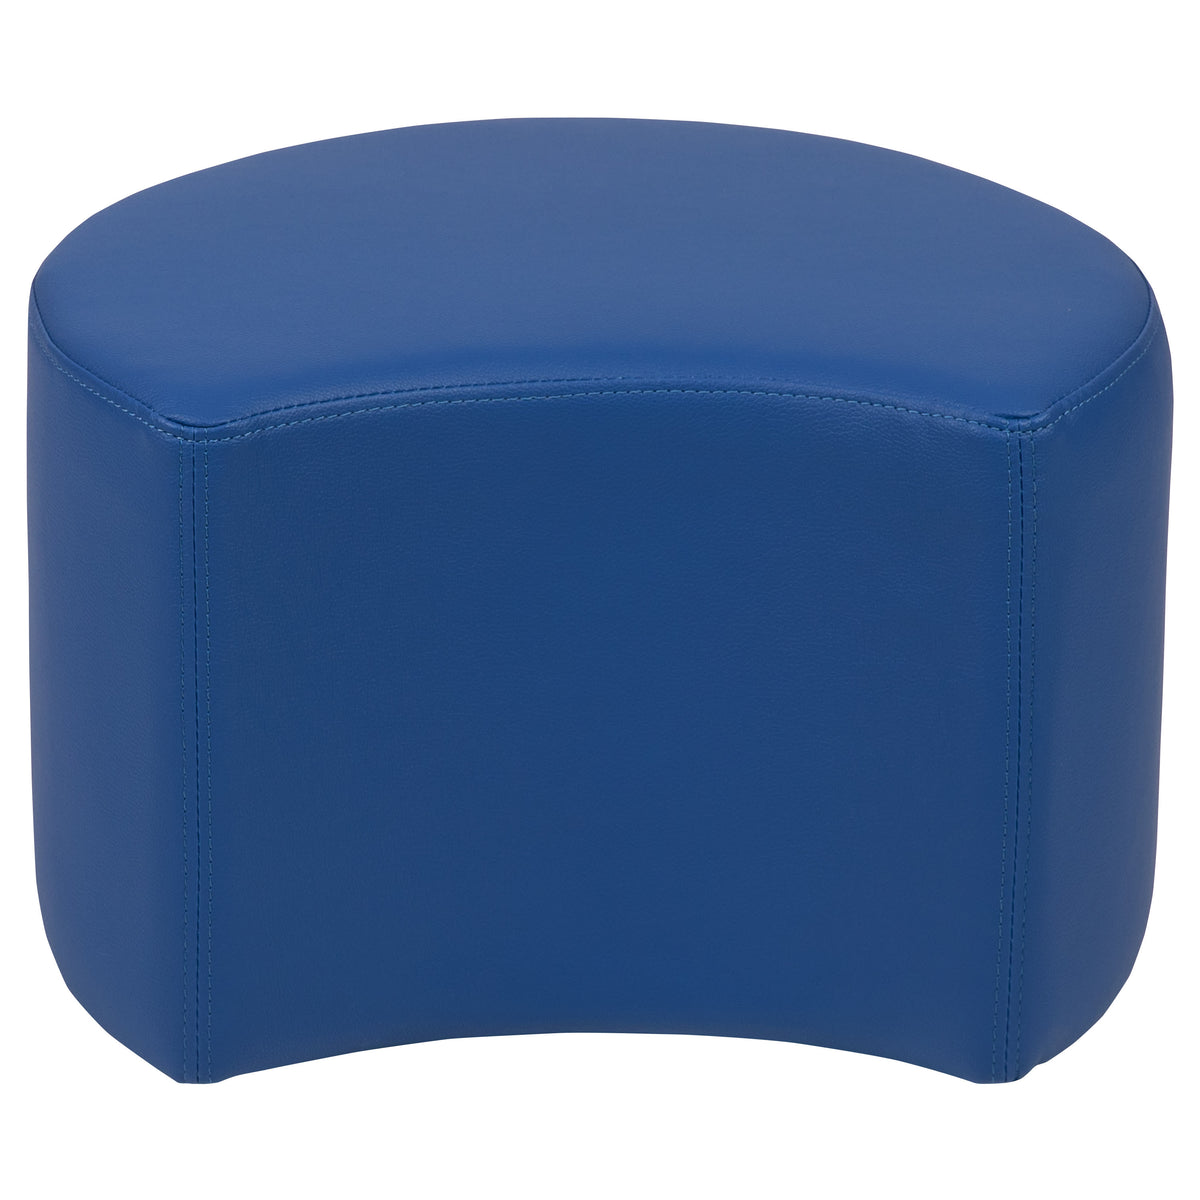 Blue |#| Soft Seating Flexible Moon for Classrooms - 12inch Seat Height (Blue)